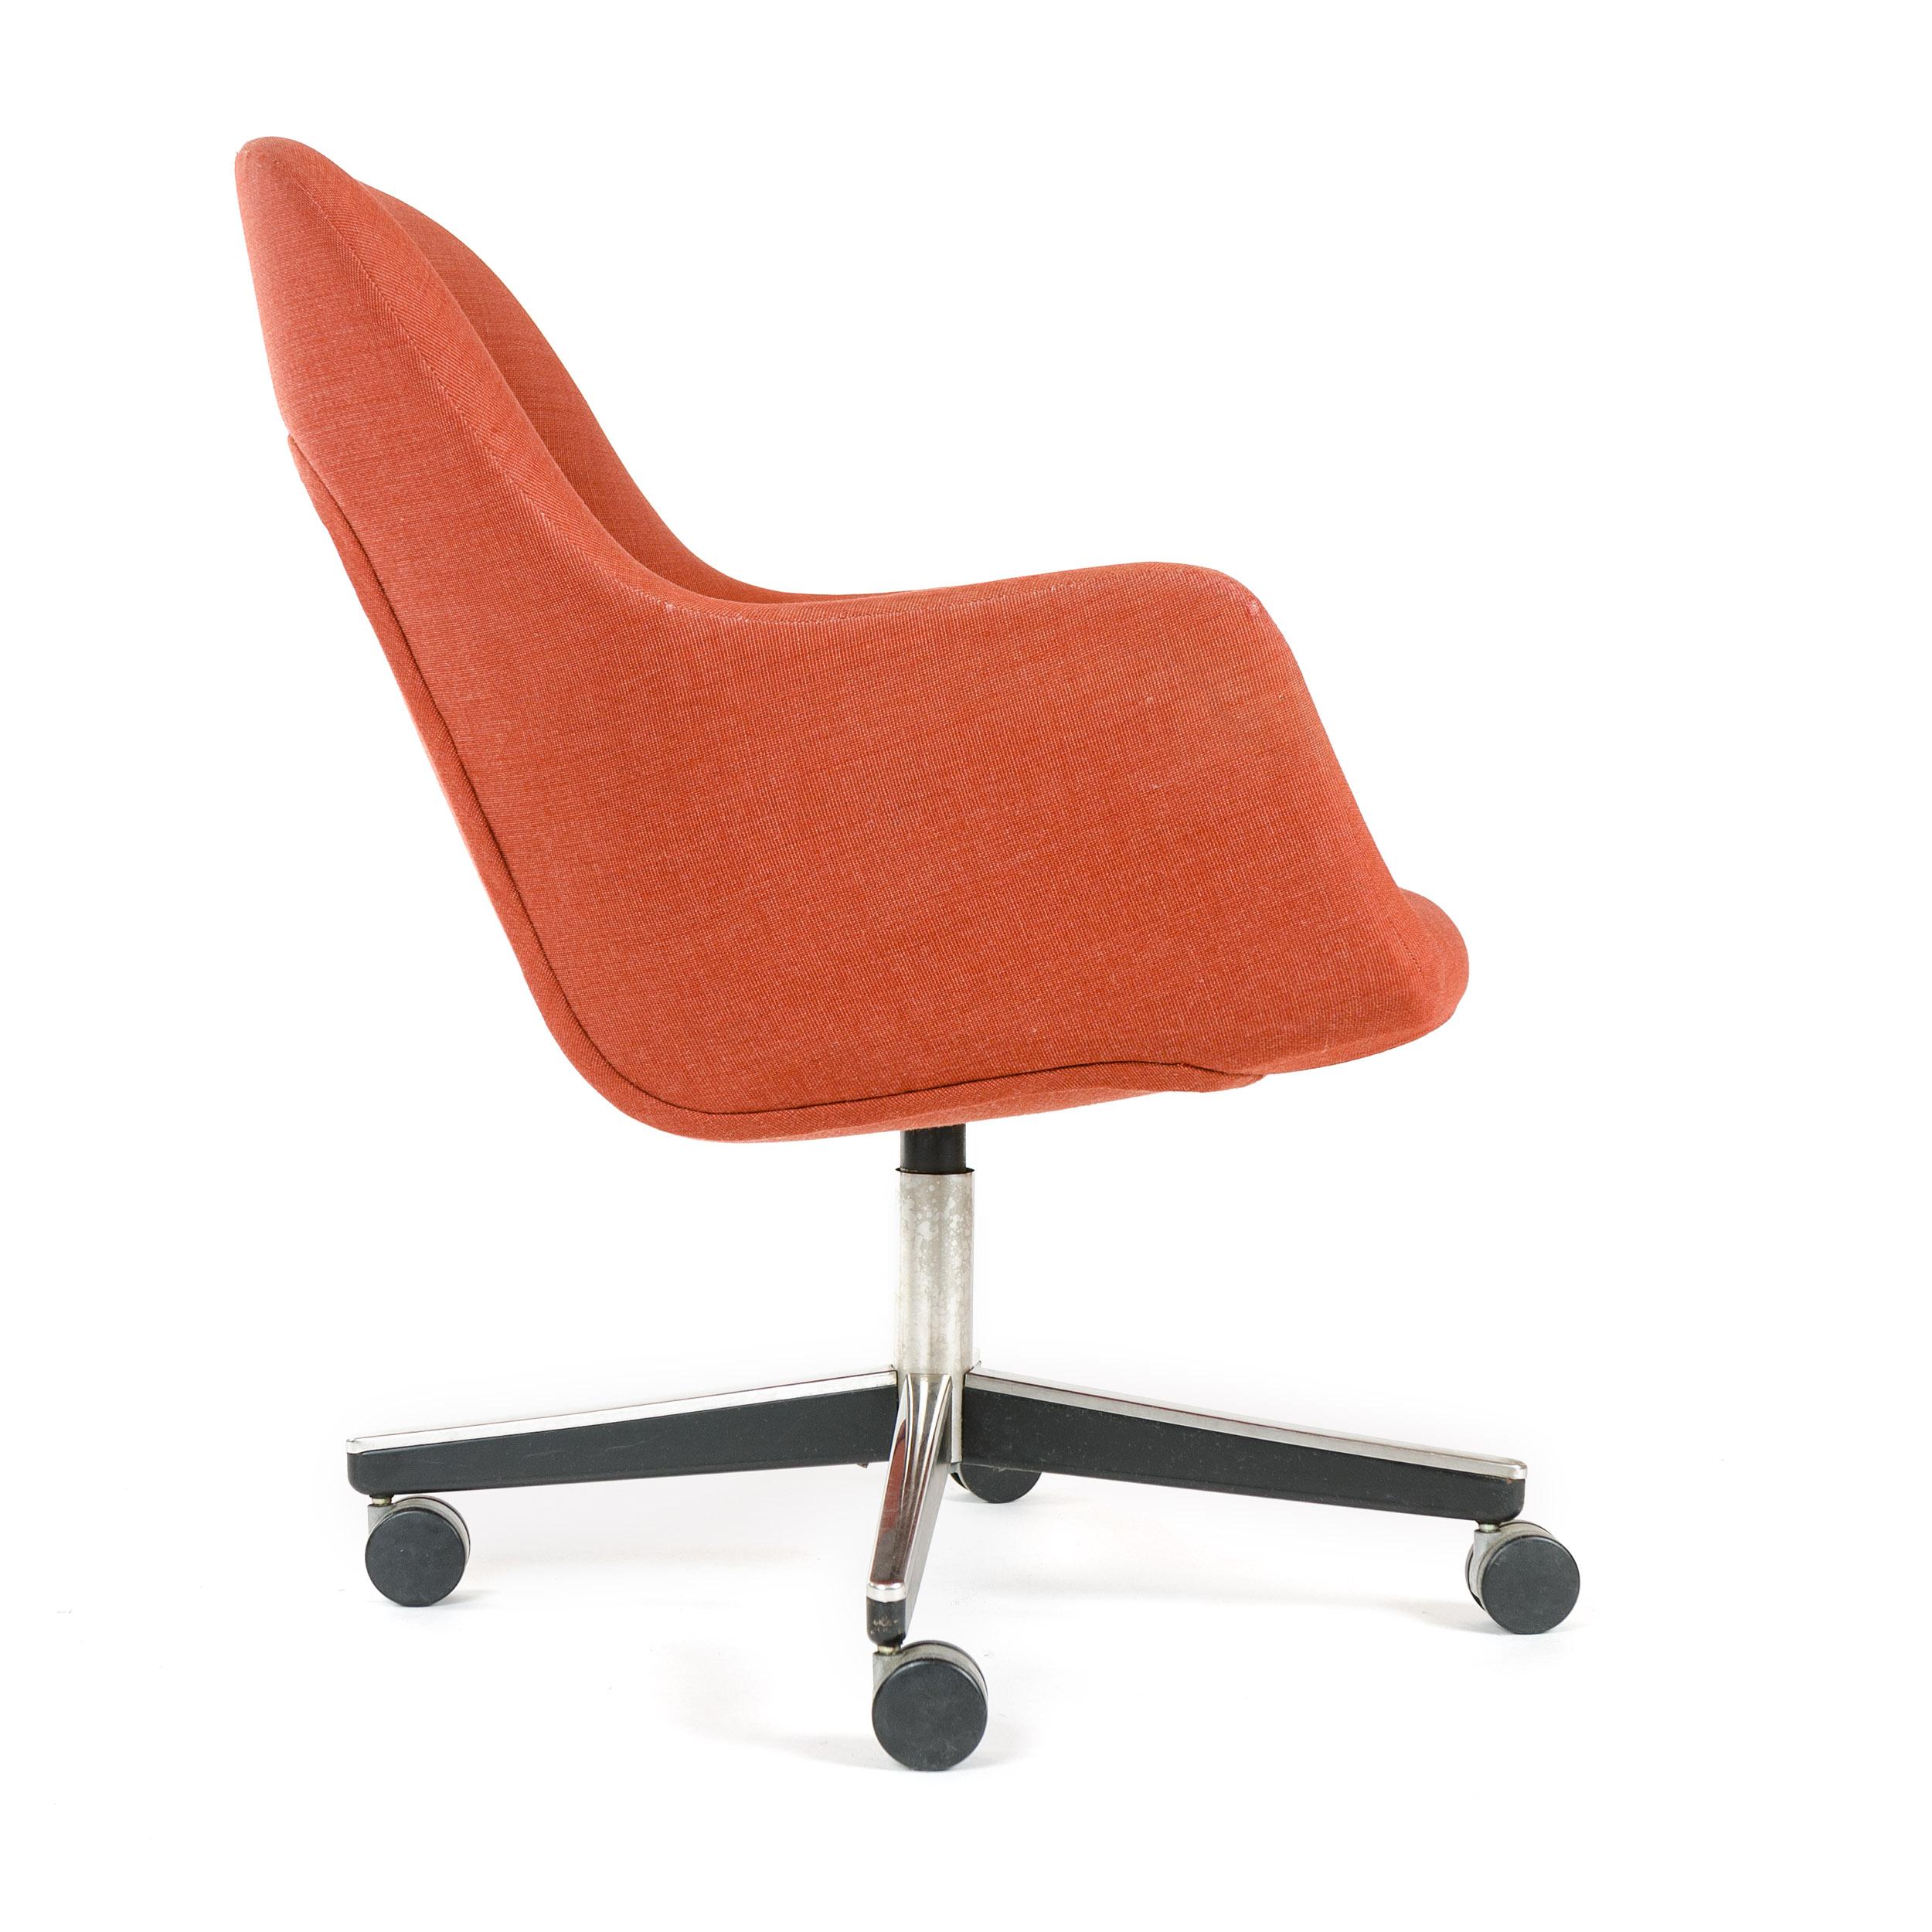 1970s office chair